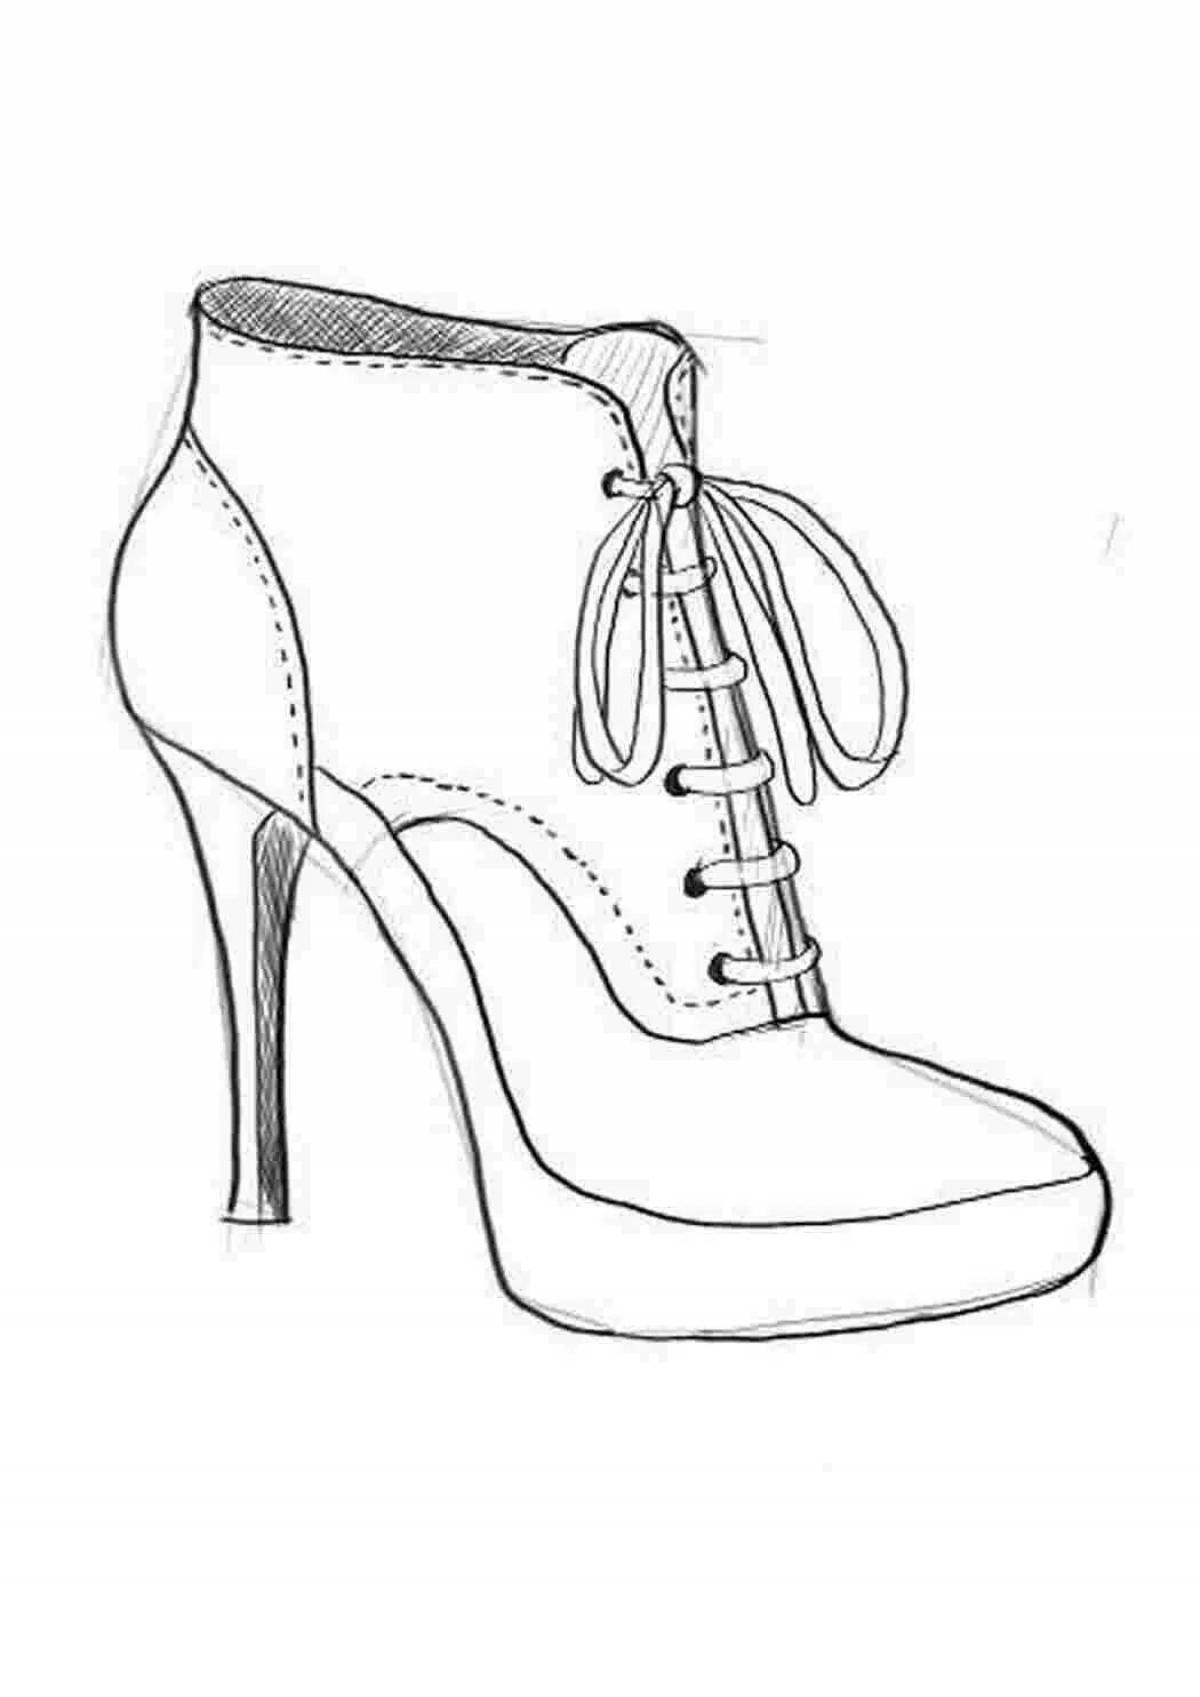 Colouring page delightful shoes for girls